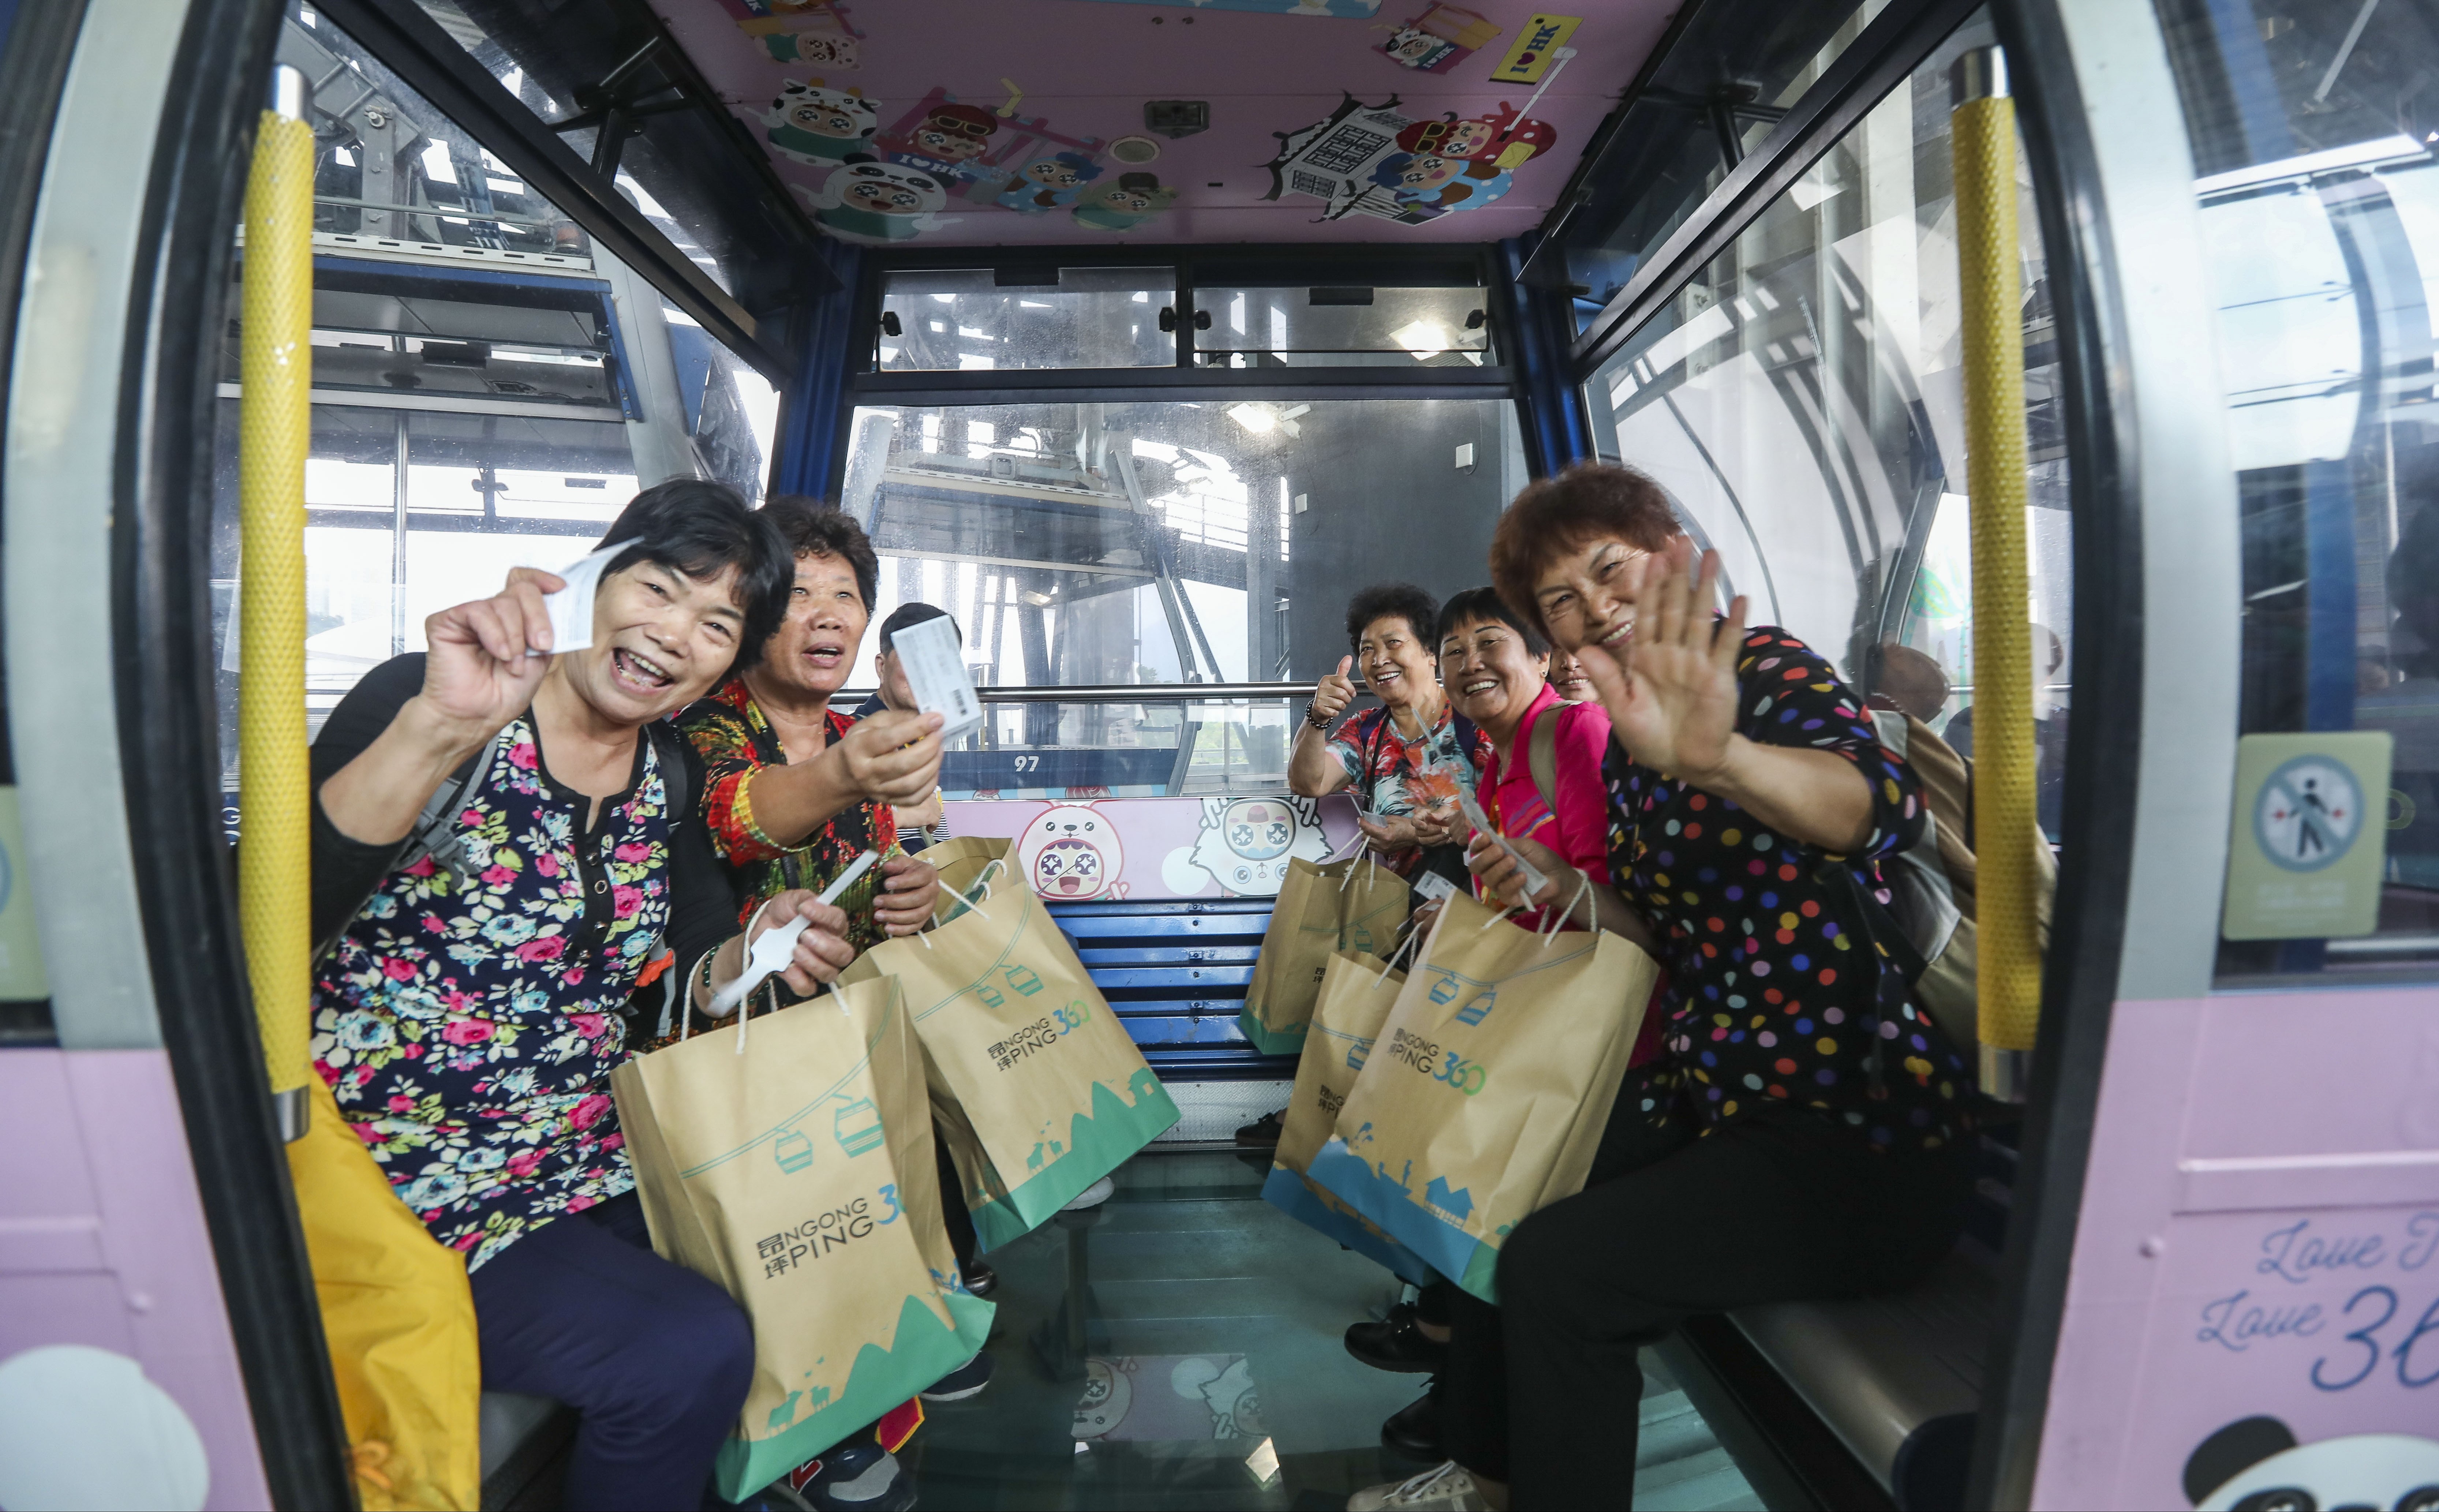 Visitors enjoy the Ngong Ping 360 cable car on Lantau Island. Photo: Xiaomei Chen